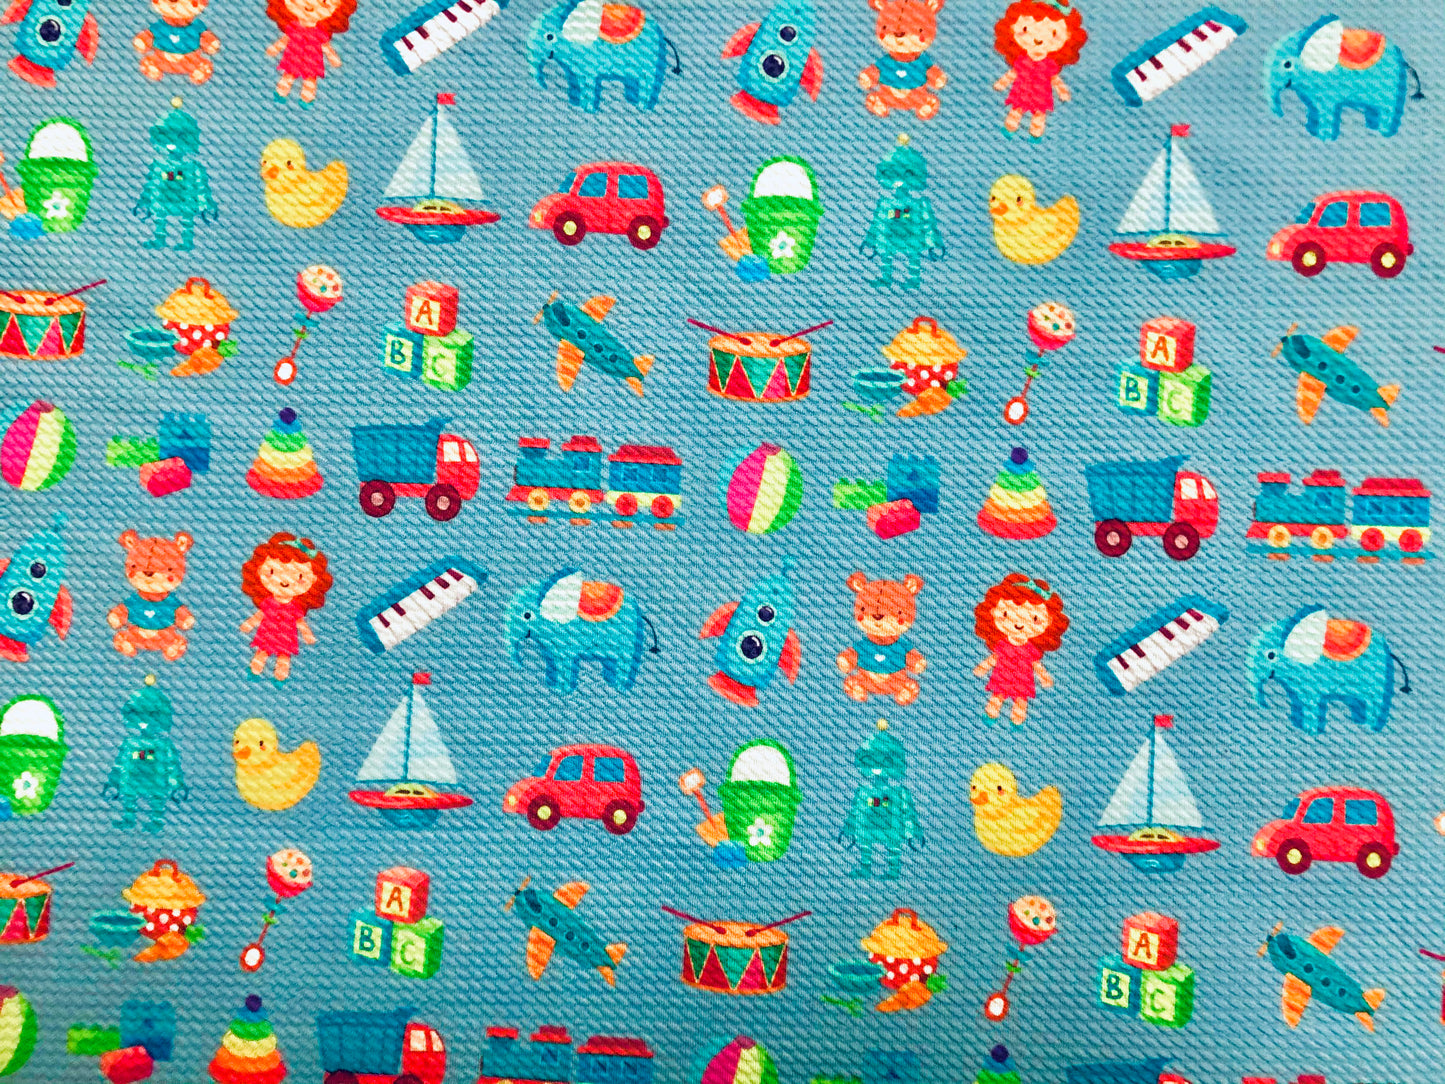 Bullet Knit Printed Fabric-Blue Yellow Toys-BPR208-Sold by the Yard-Bulk Available